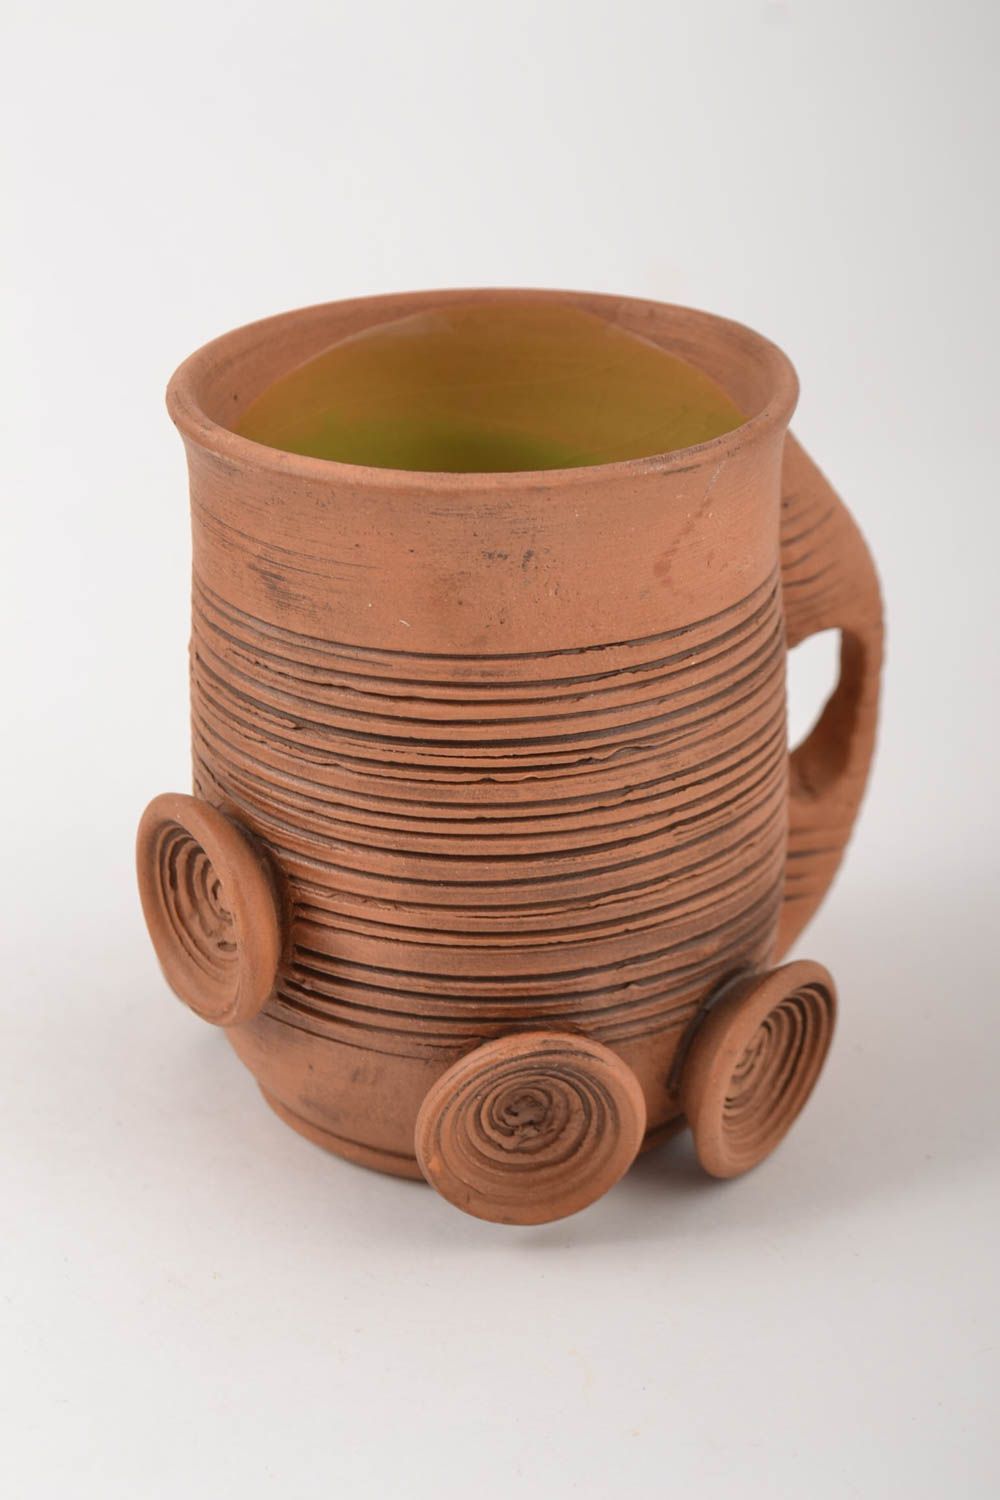 Art clay cup for tea or coffee 6 oz in light brown color and handle photo 3